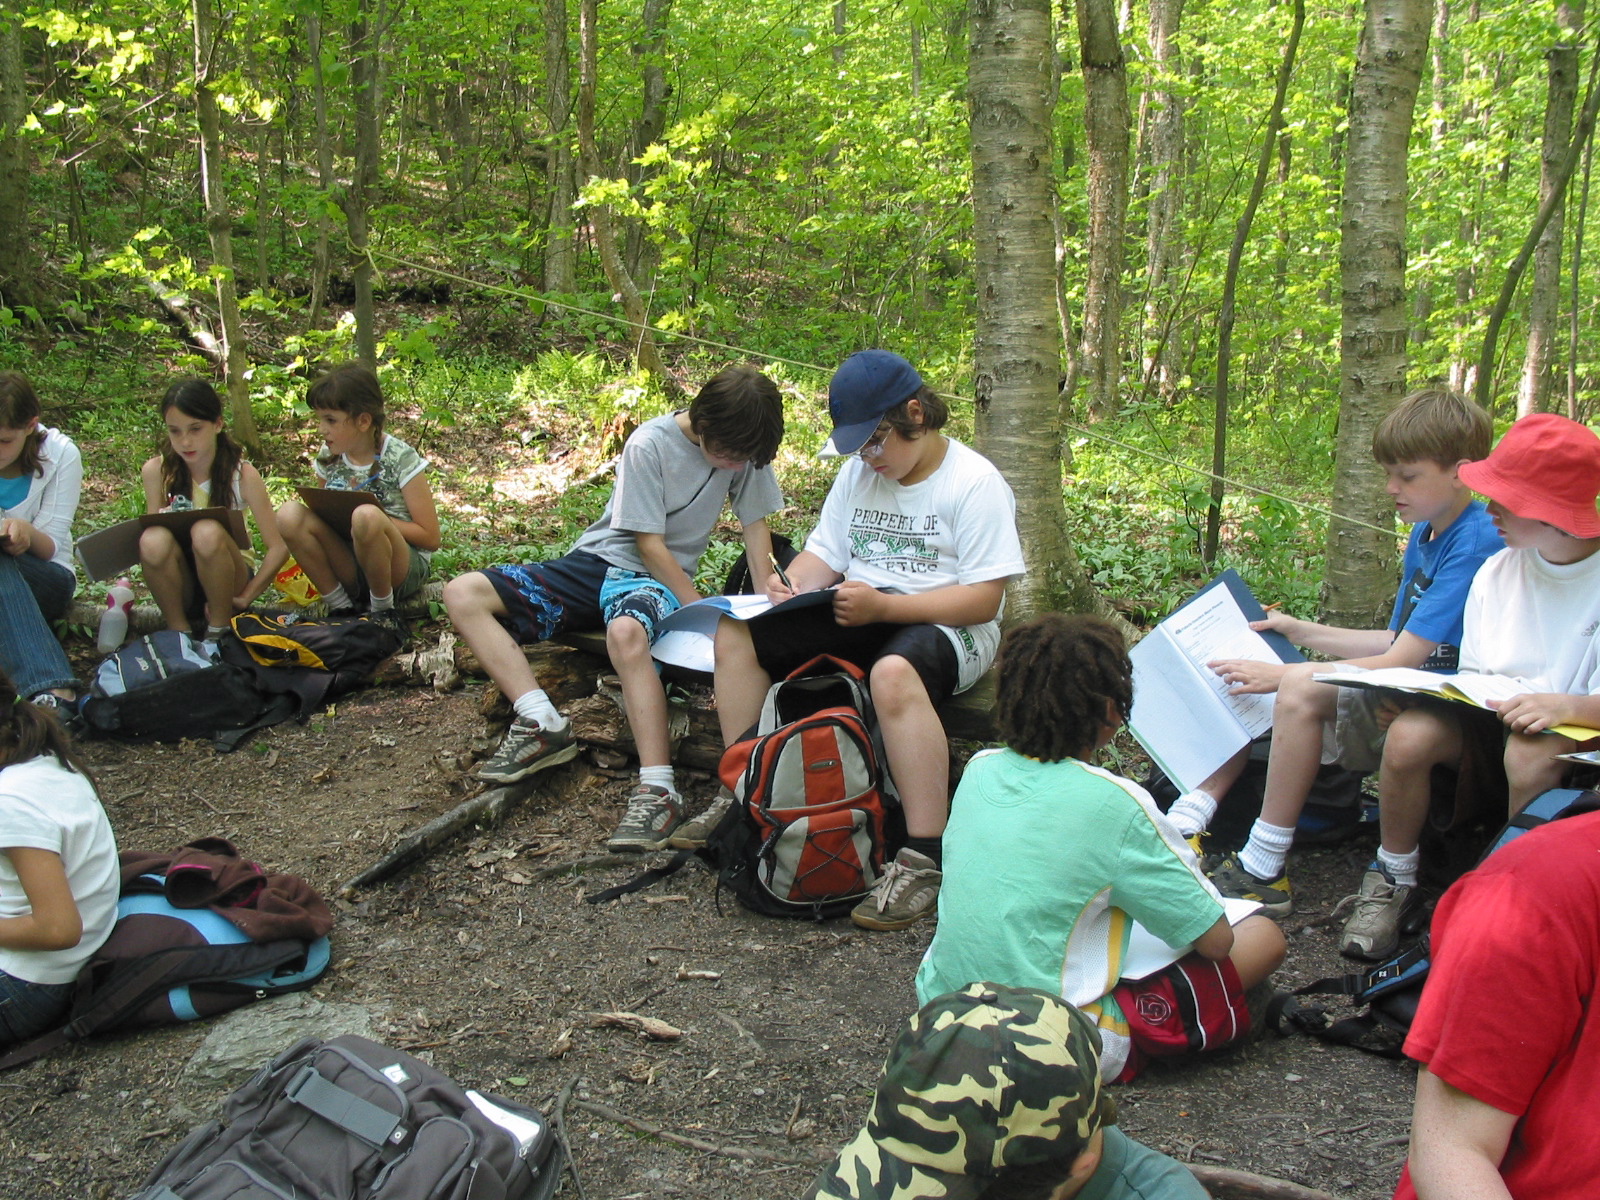 Kids working on project in woods